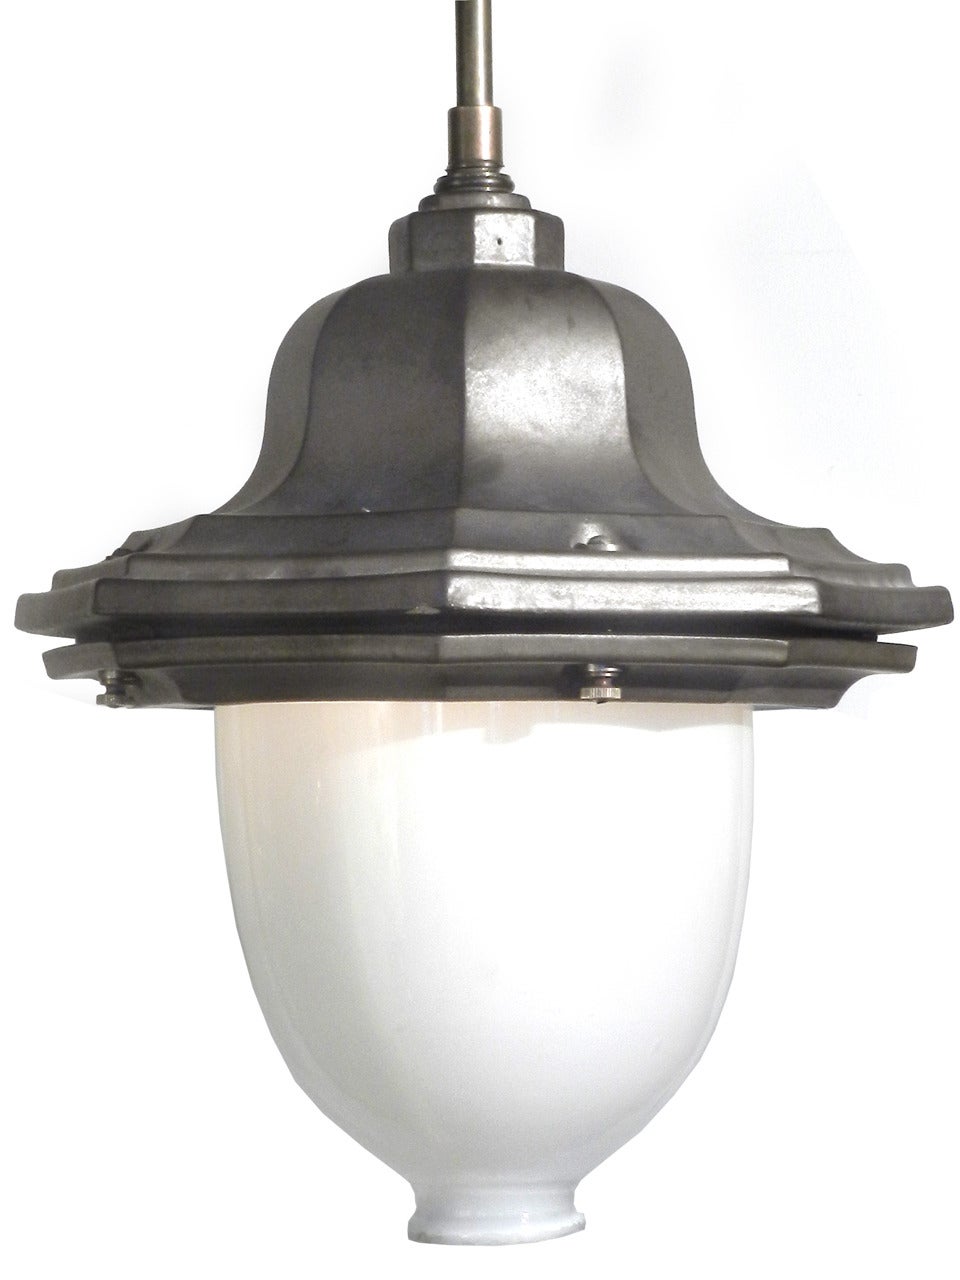 This is a beautifully glazed heavy terracotta lamps was inspired by turn-of-the-century cast iron French street lights. The finish is kiln fired producing a subtle patina in a dark matte gray. It has the feel and finish of Teco pottery. The look and